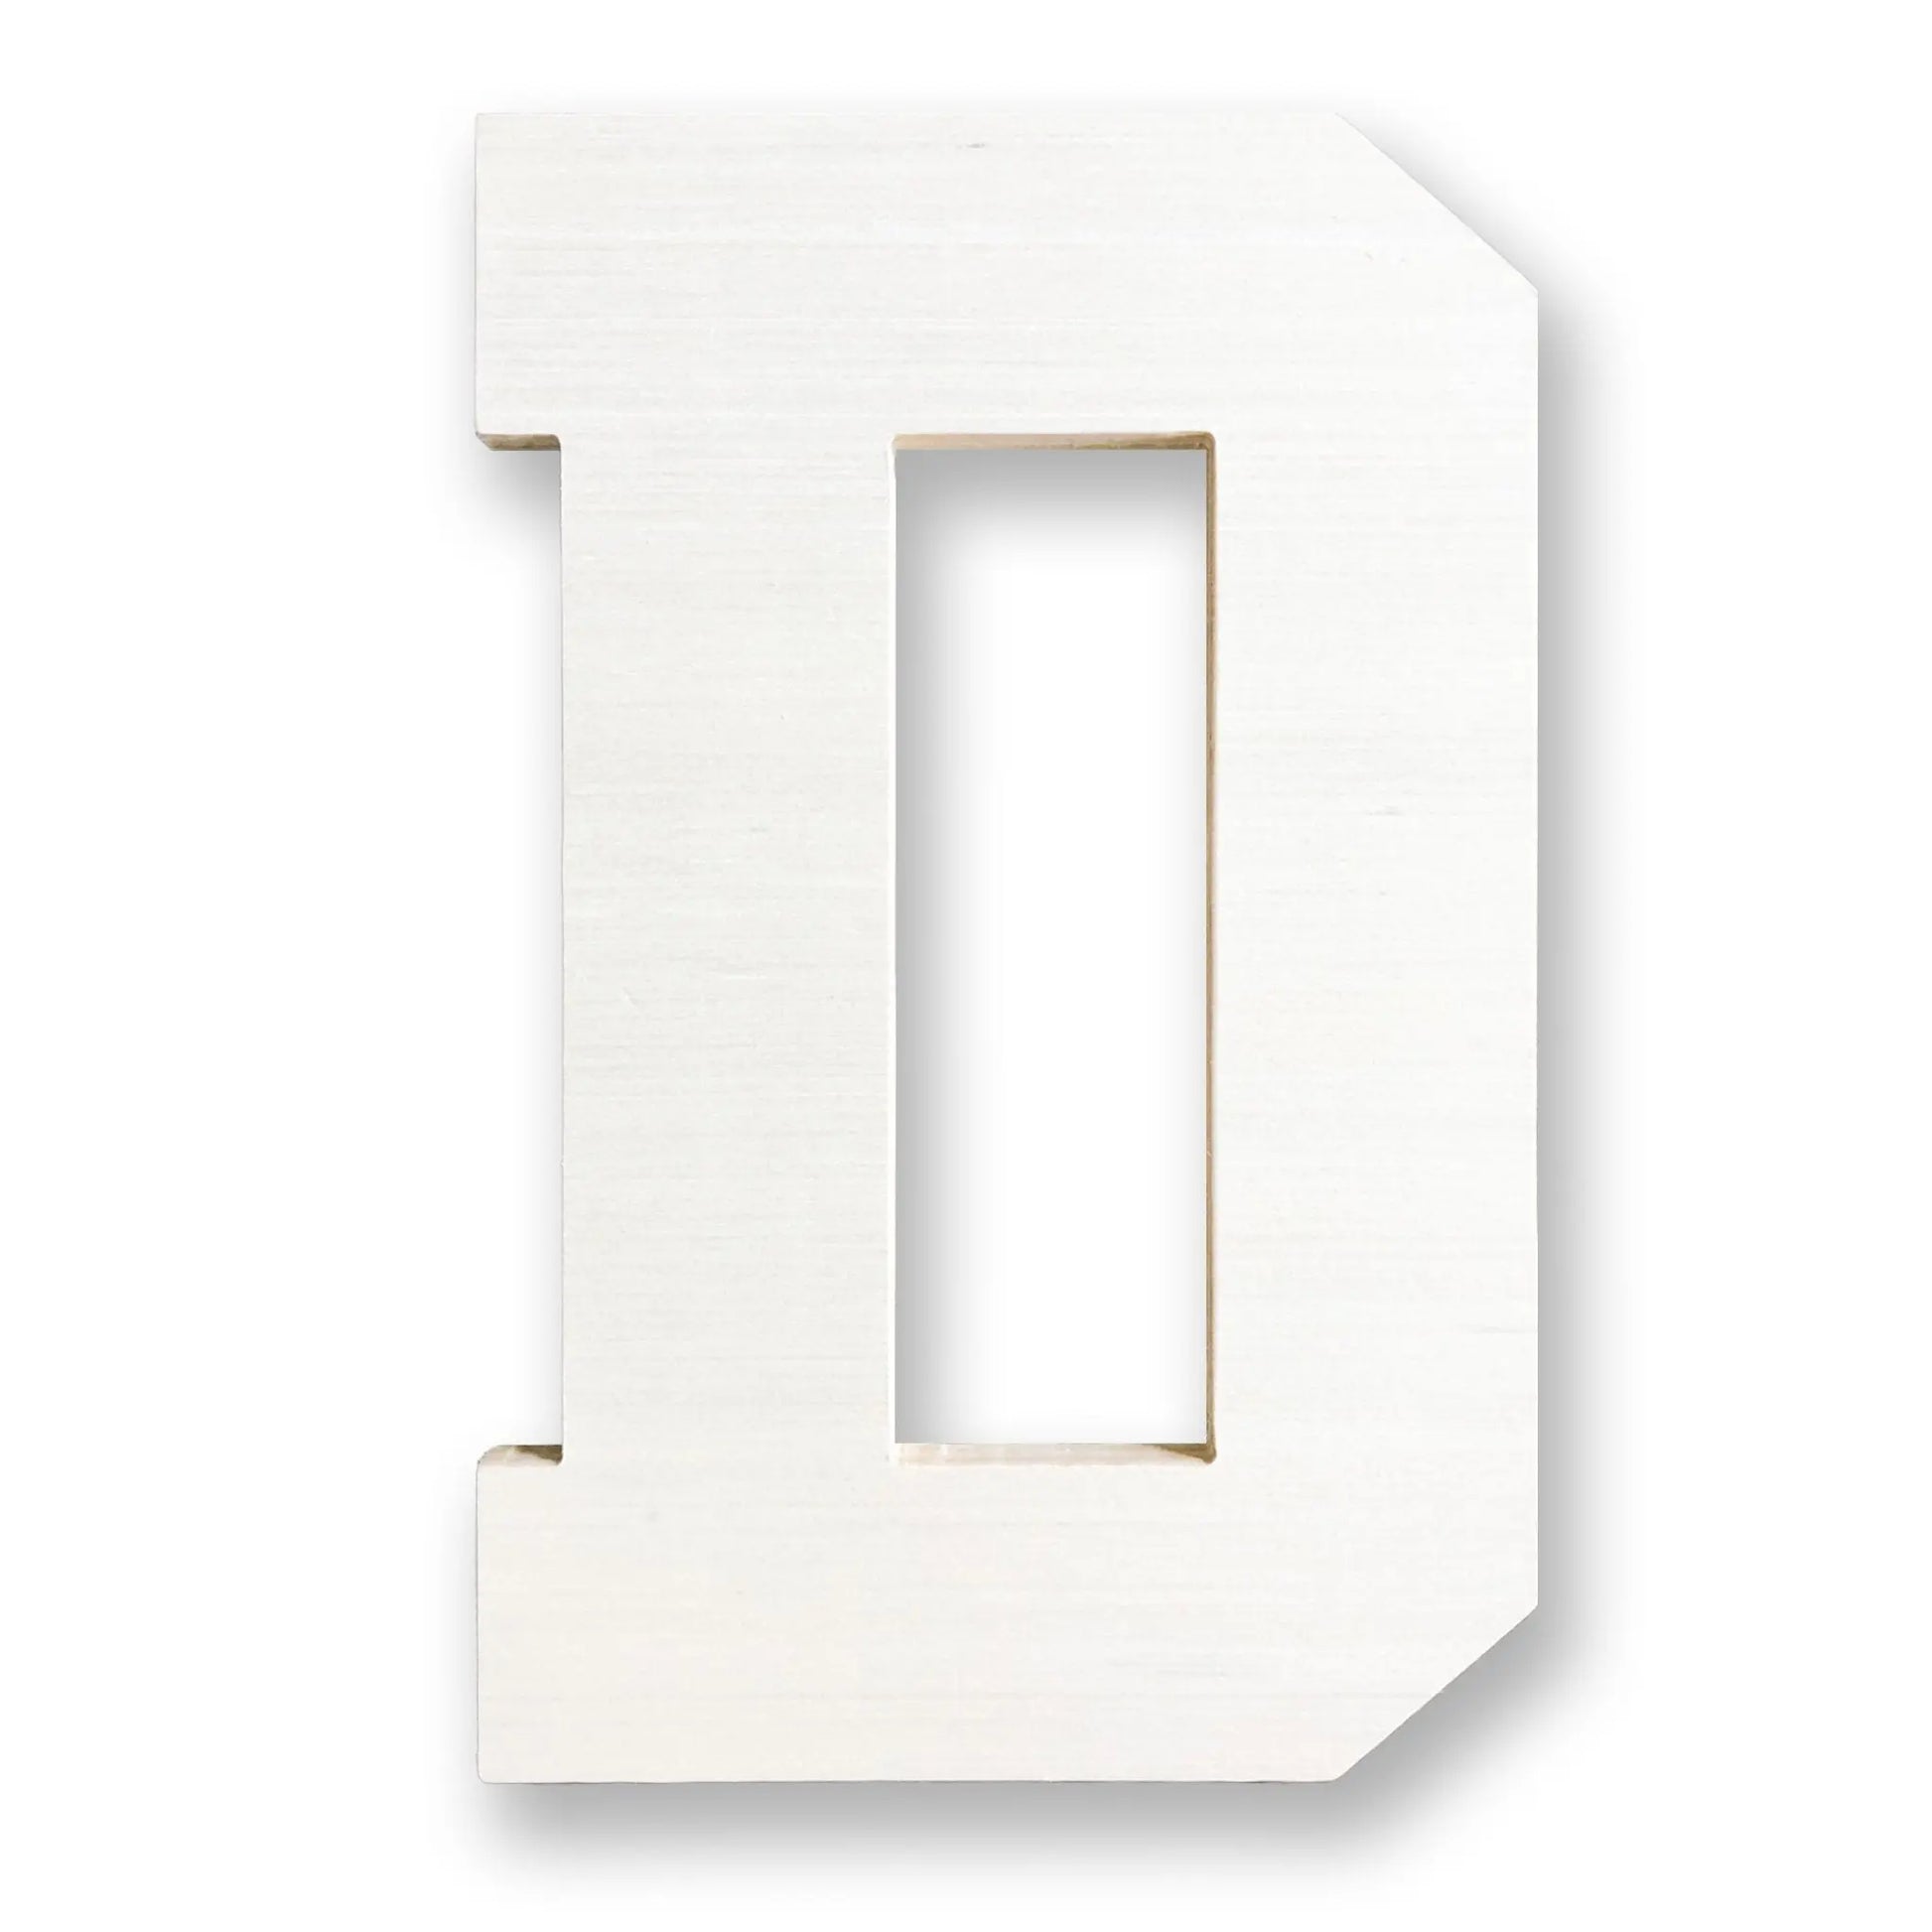 42 Inch Wooden Letters | Wooden Numbers, 3.5 Ft - collageandwood